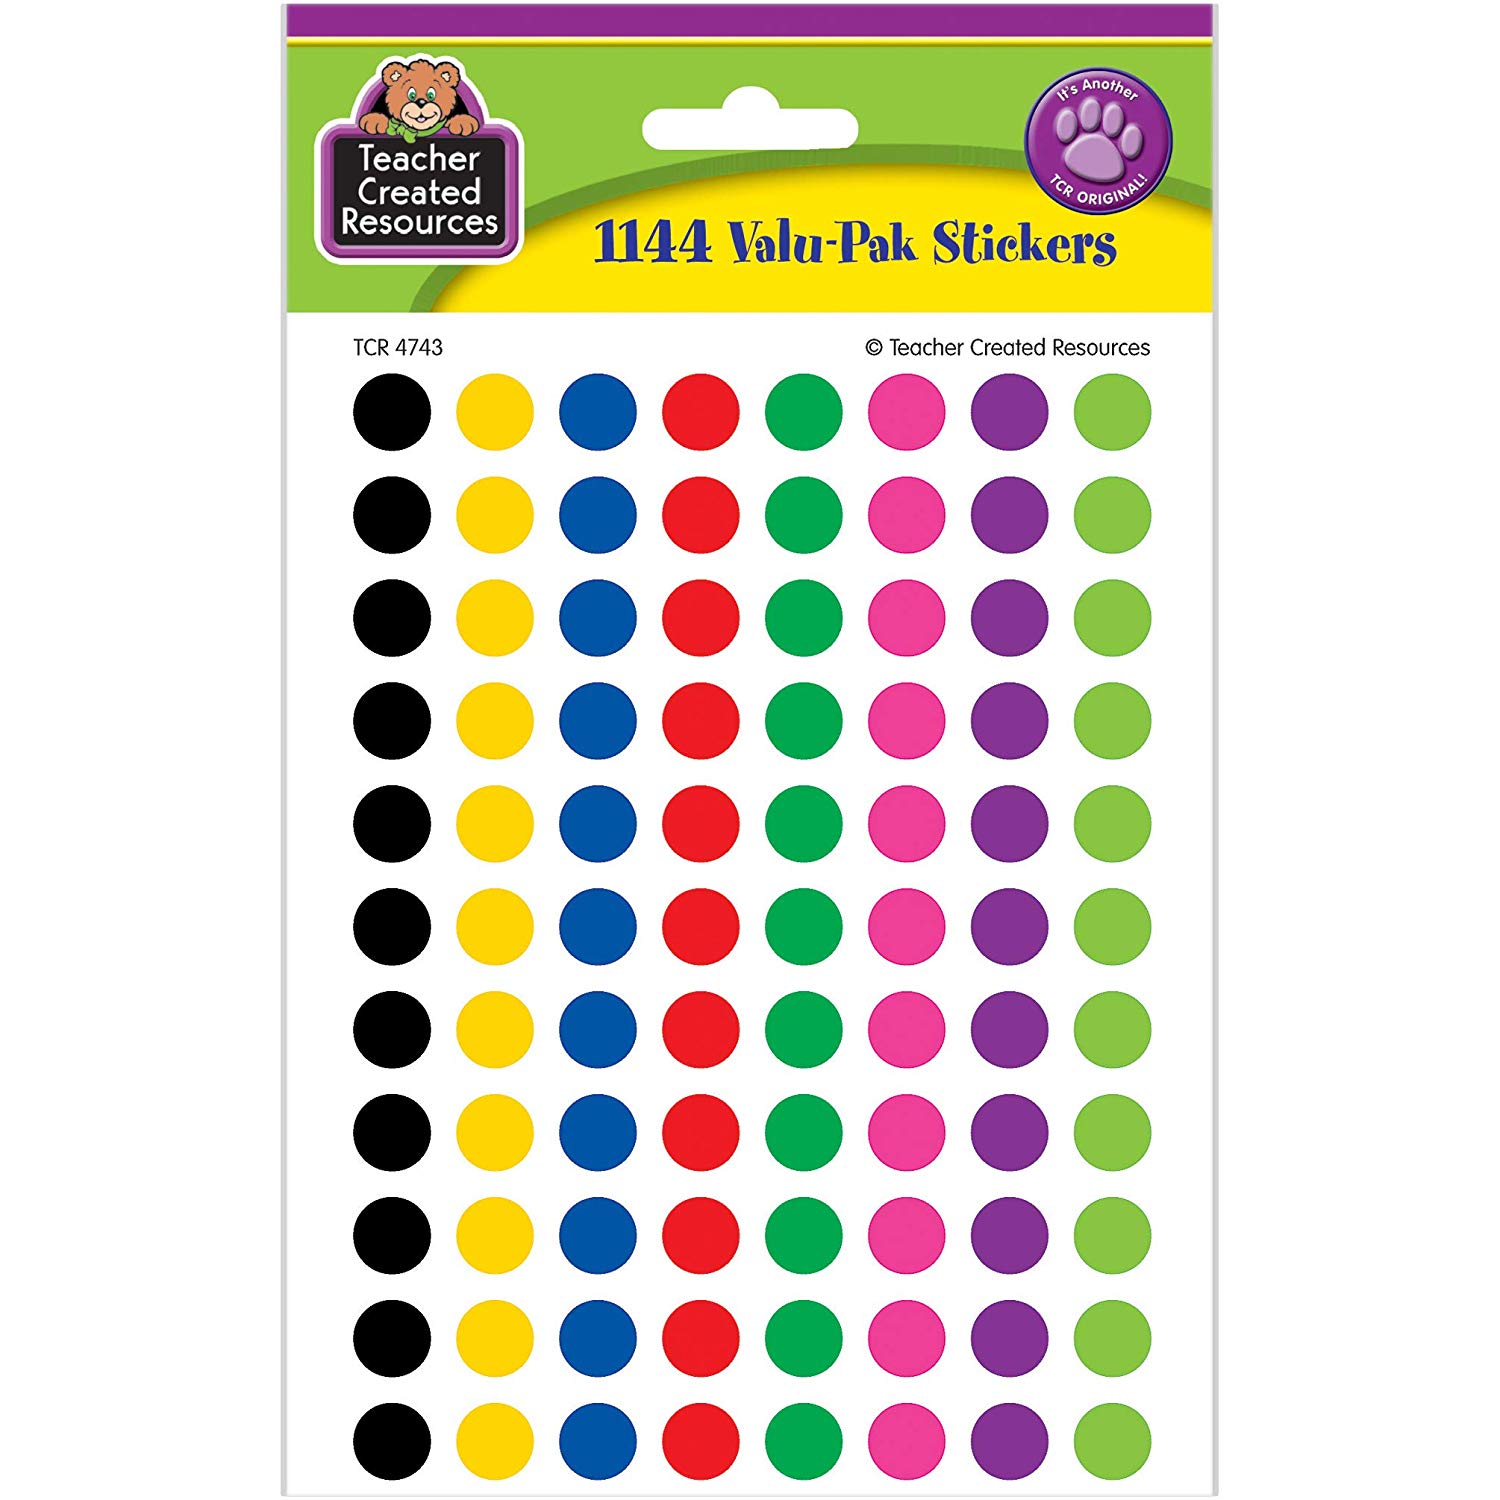 Teacher Created Resources 4743 Colorful Circles Mini Stickers Value Pack - 1144 Stickers per pack